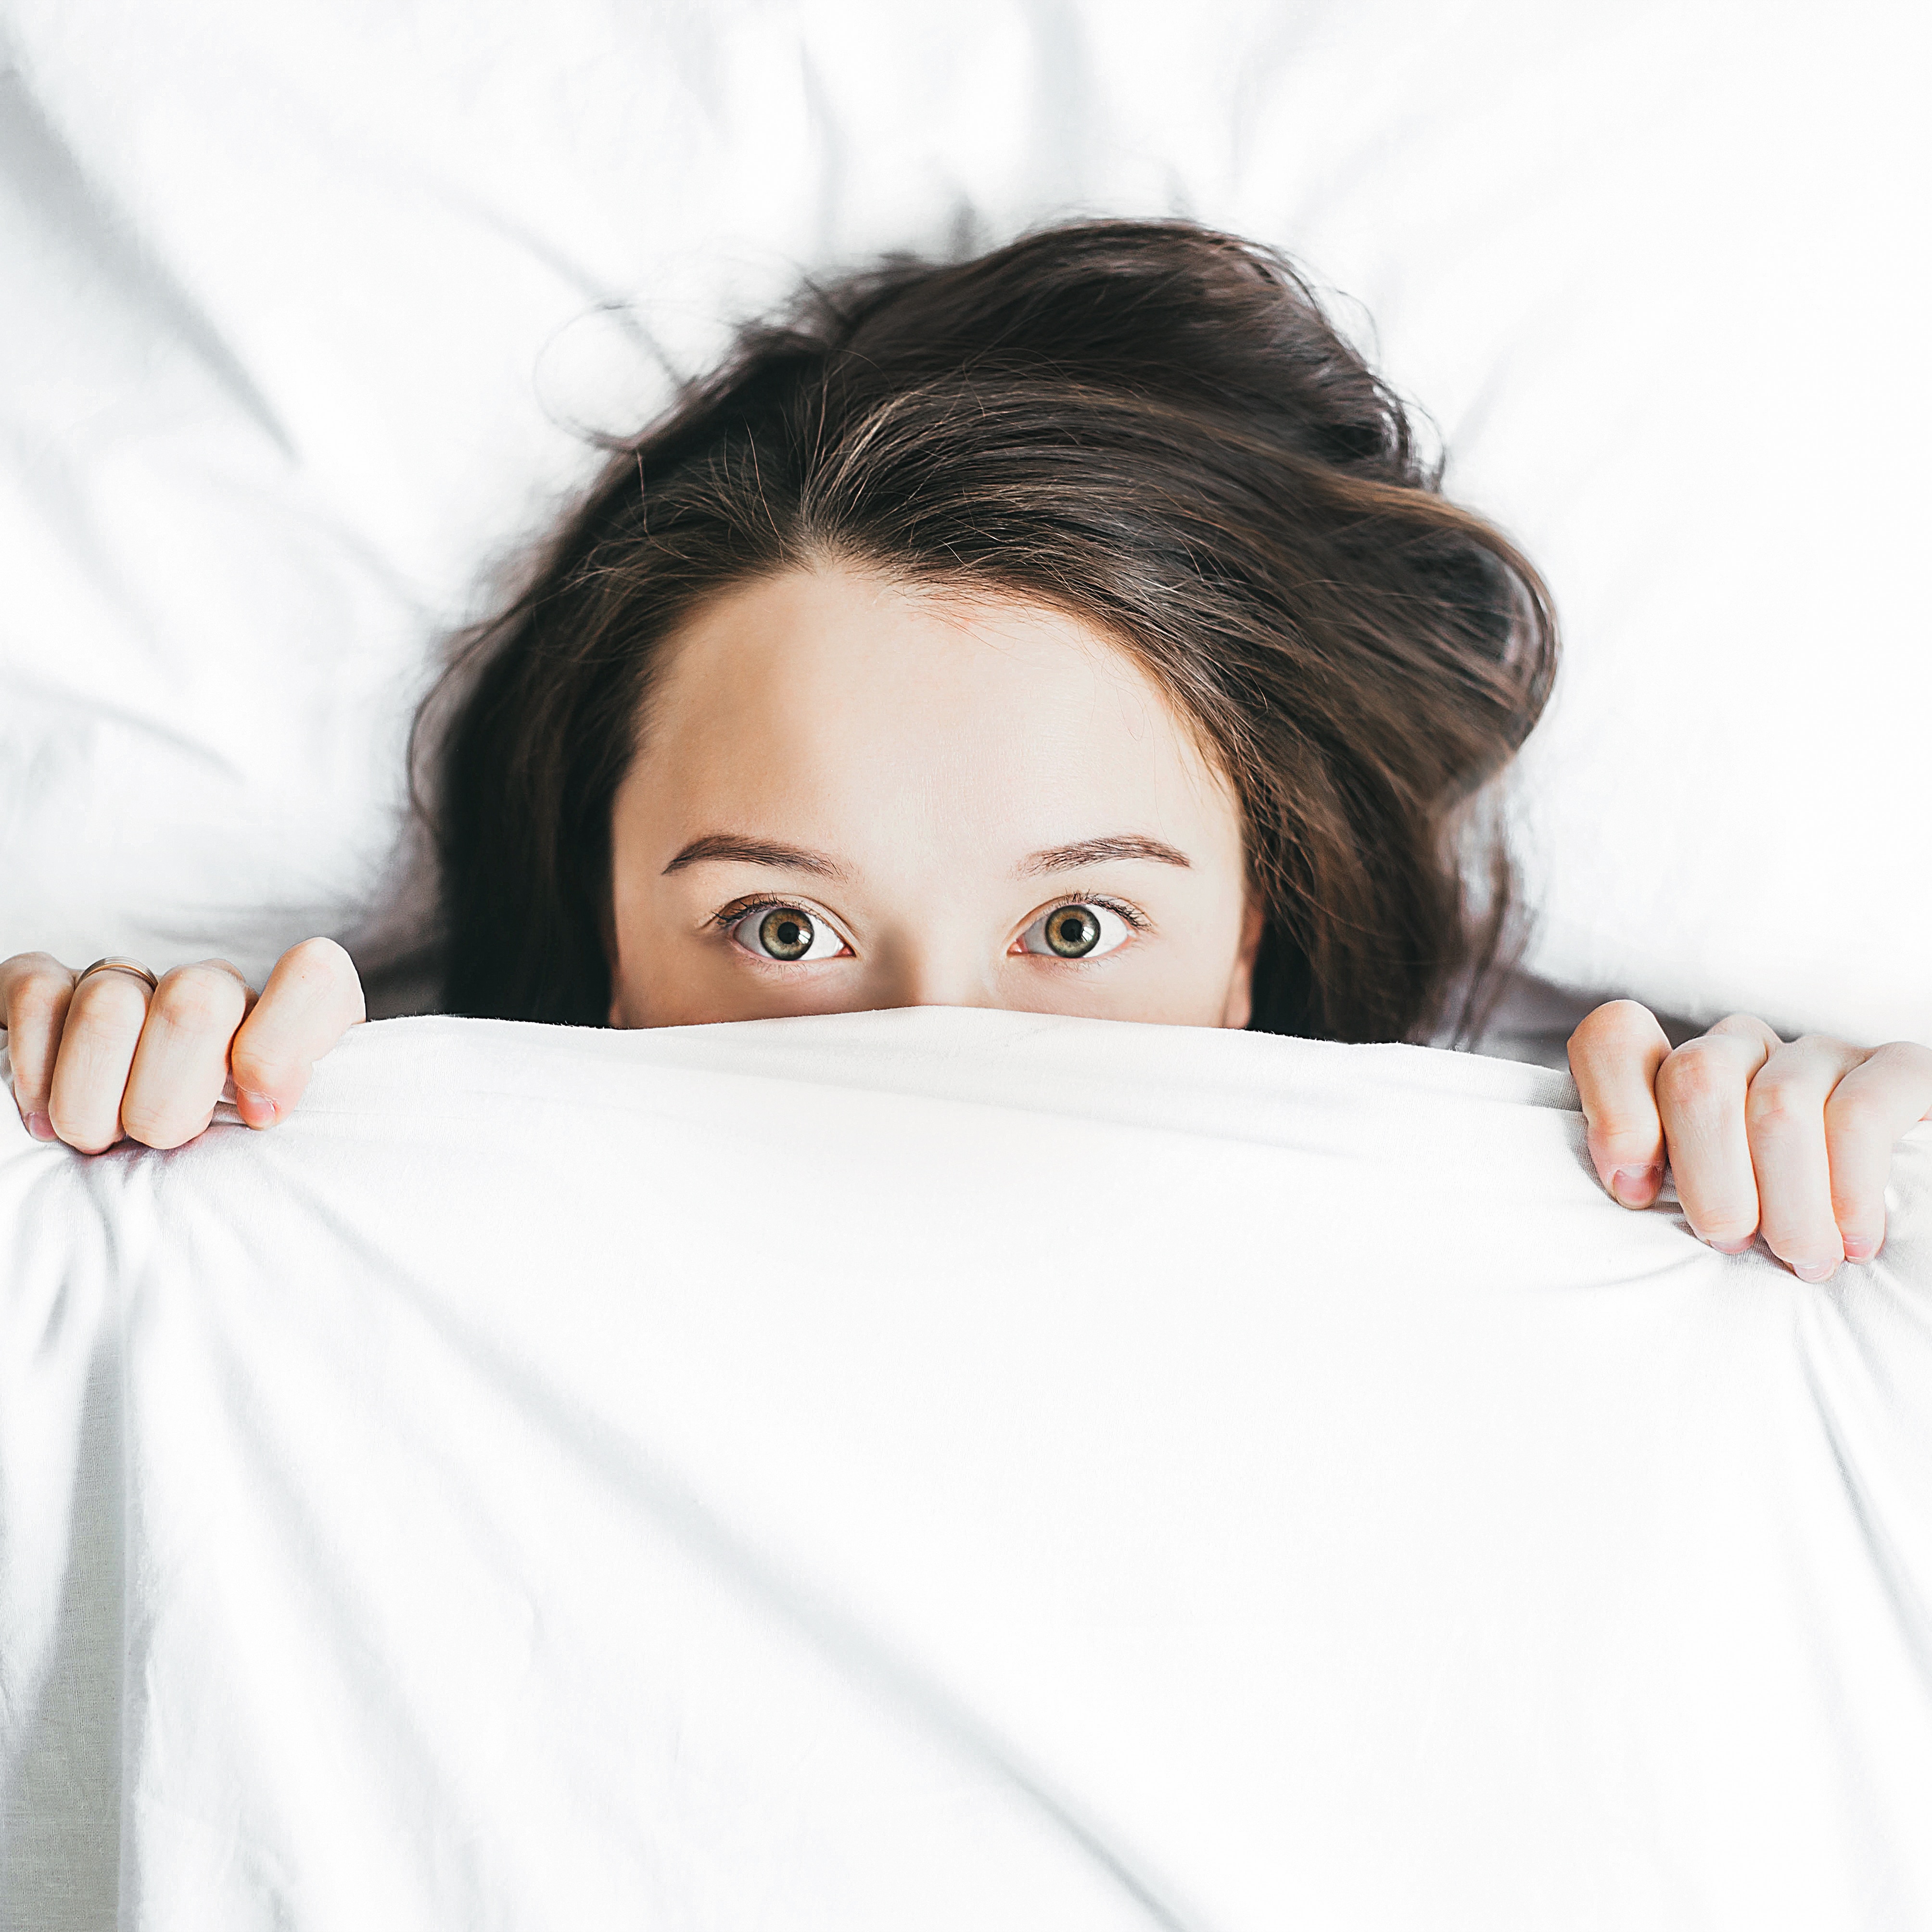 Young caucasian women with brown hair and hazel eyes lying in bed amongst white sheets hold the covers over her face until just under her eyes. She is wearing a 'I don't want to get out of bed' expression